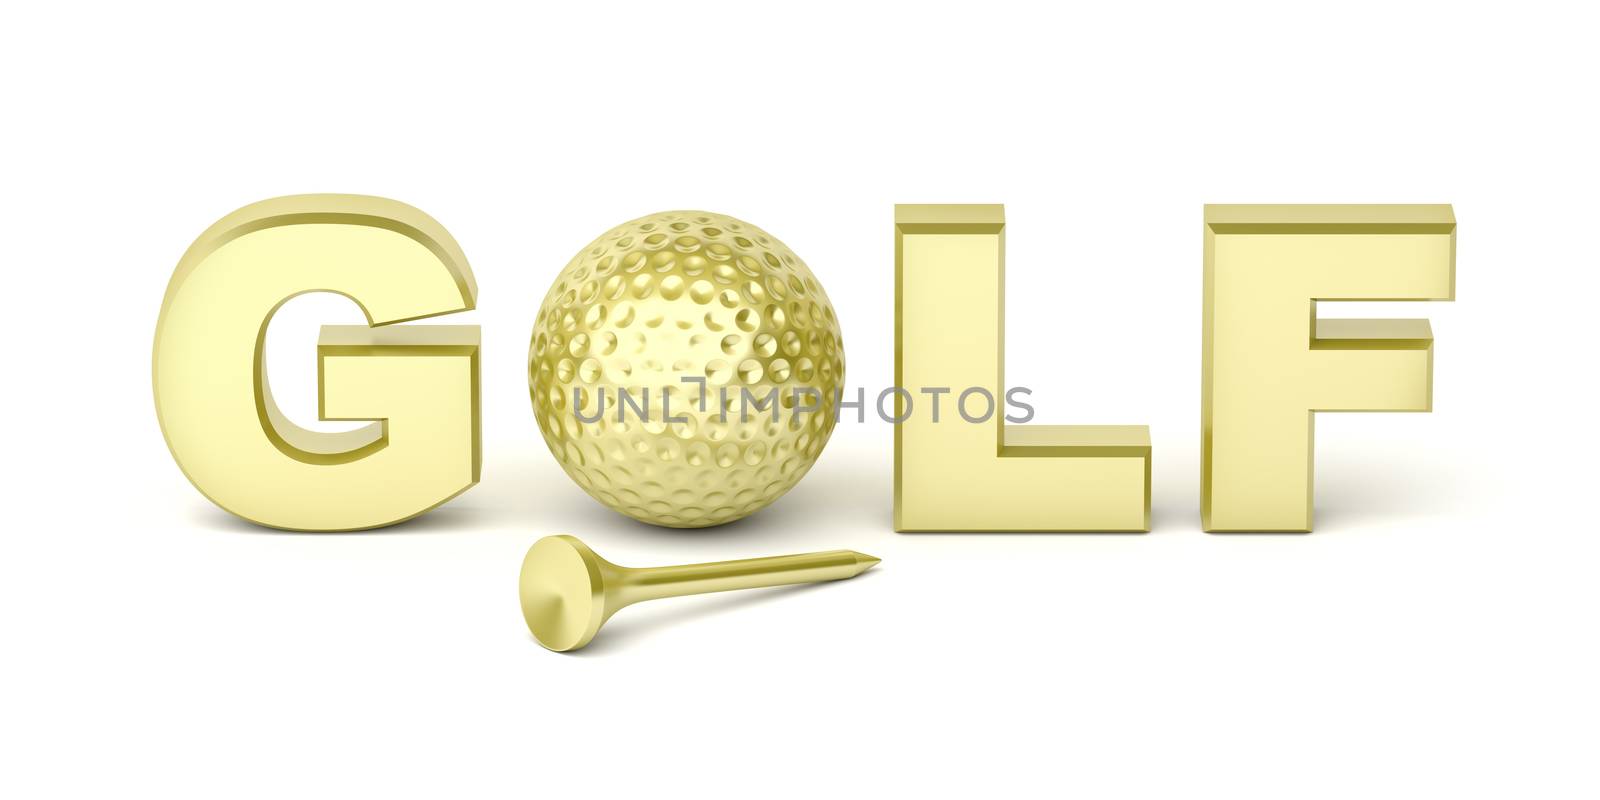 Golden golf ball and tee on white background